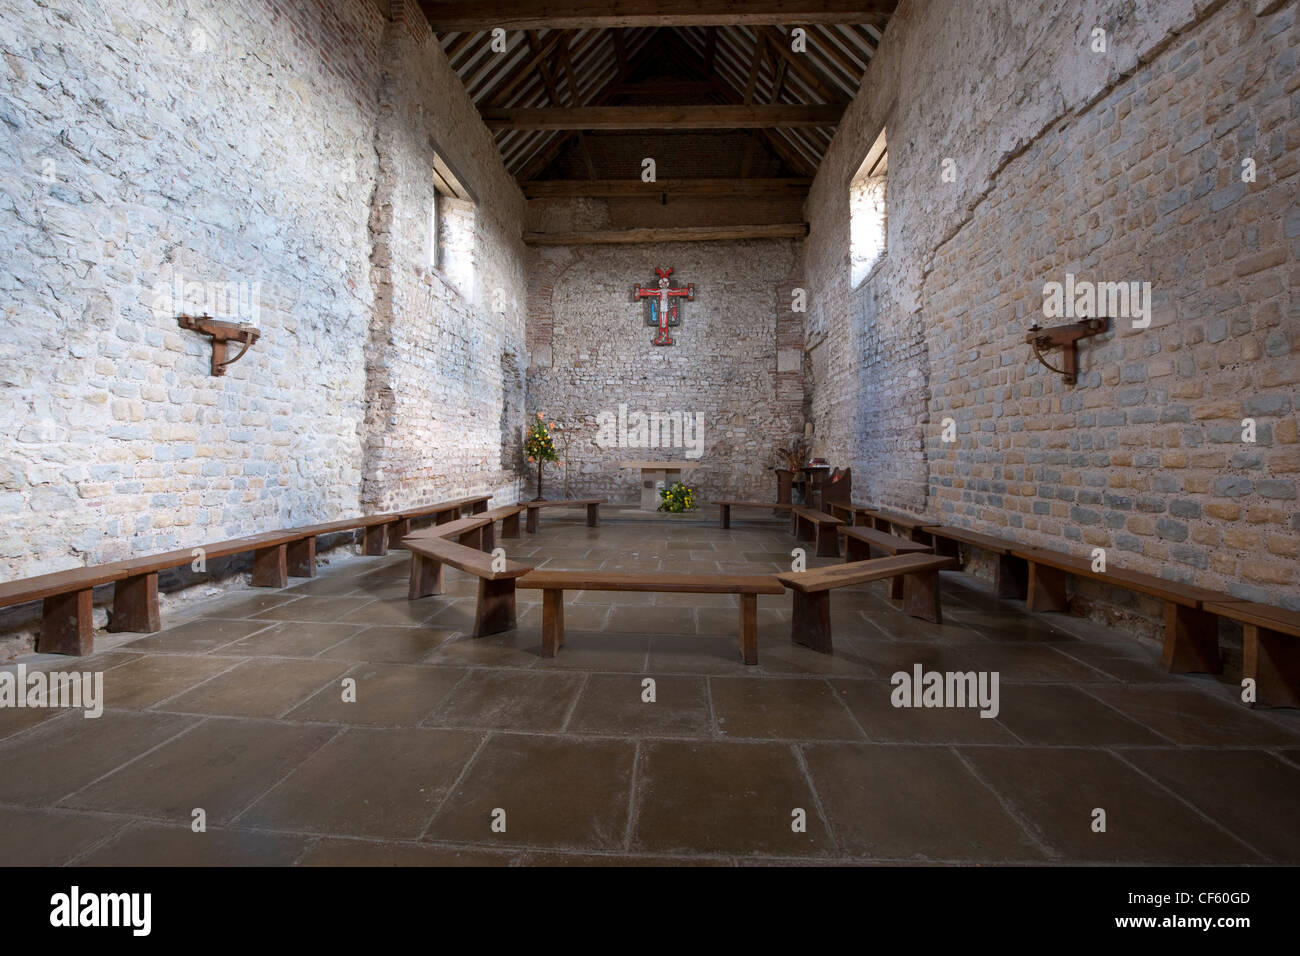 Interior of the Chapel of St Peter-on-the-Wall. It is the oldest church in the UK dating back to 654AD. Stock Photo